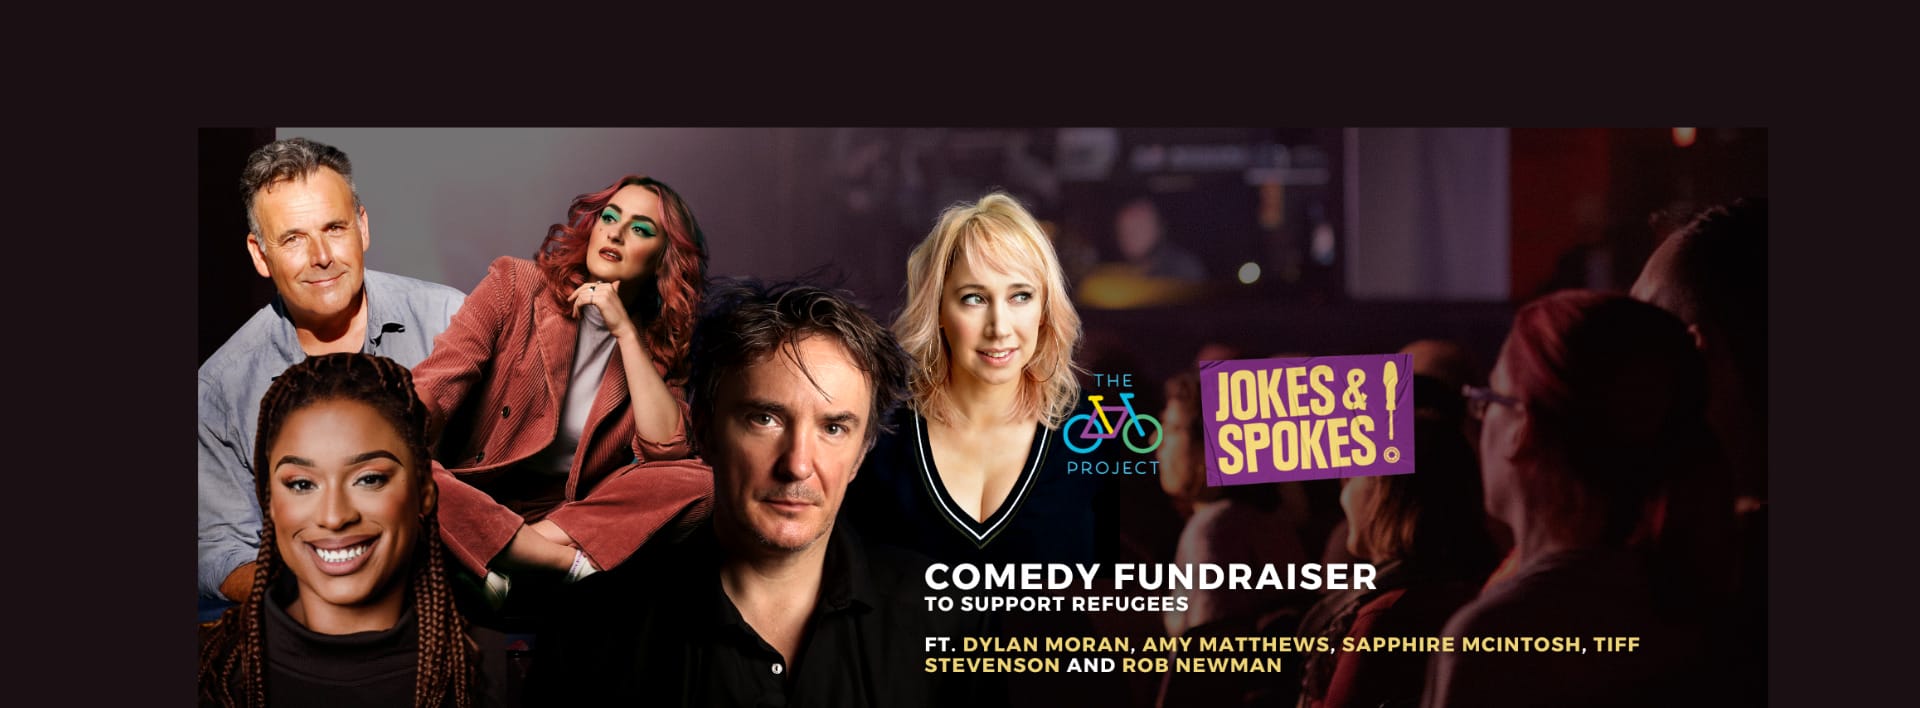 The Bike Project Comedy Fundraiser: Jokes and Spokes with Dylan Moran